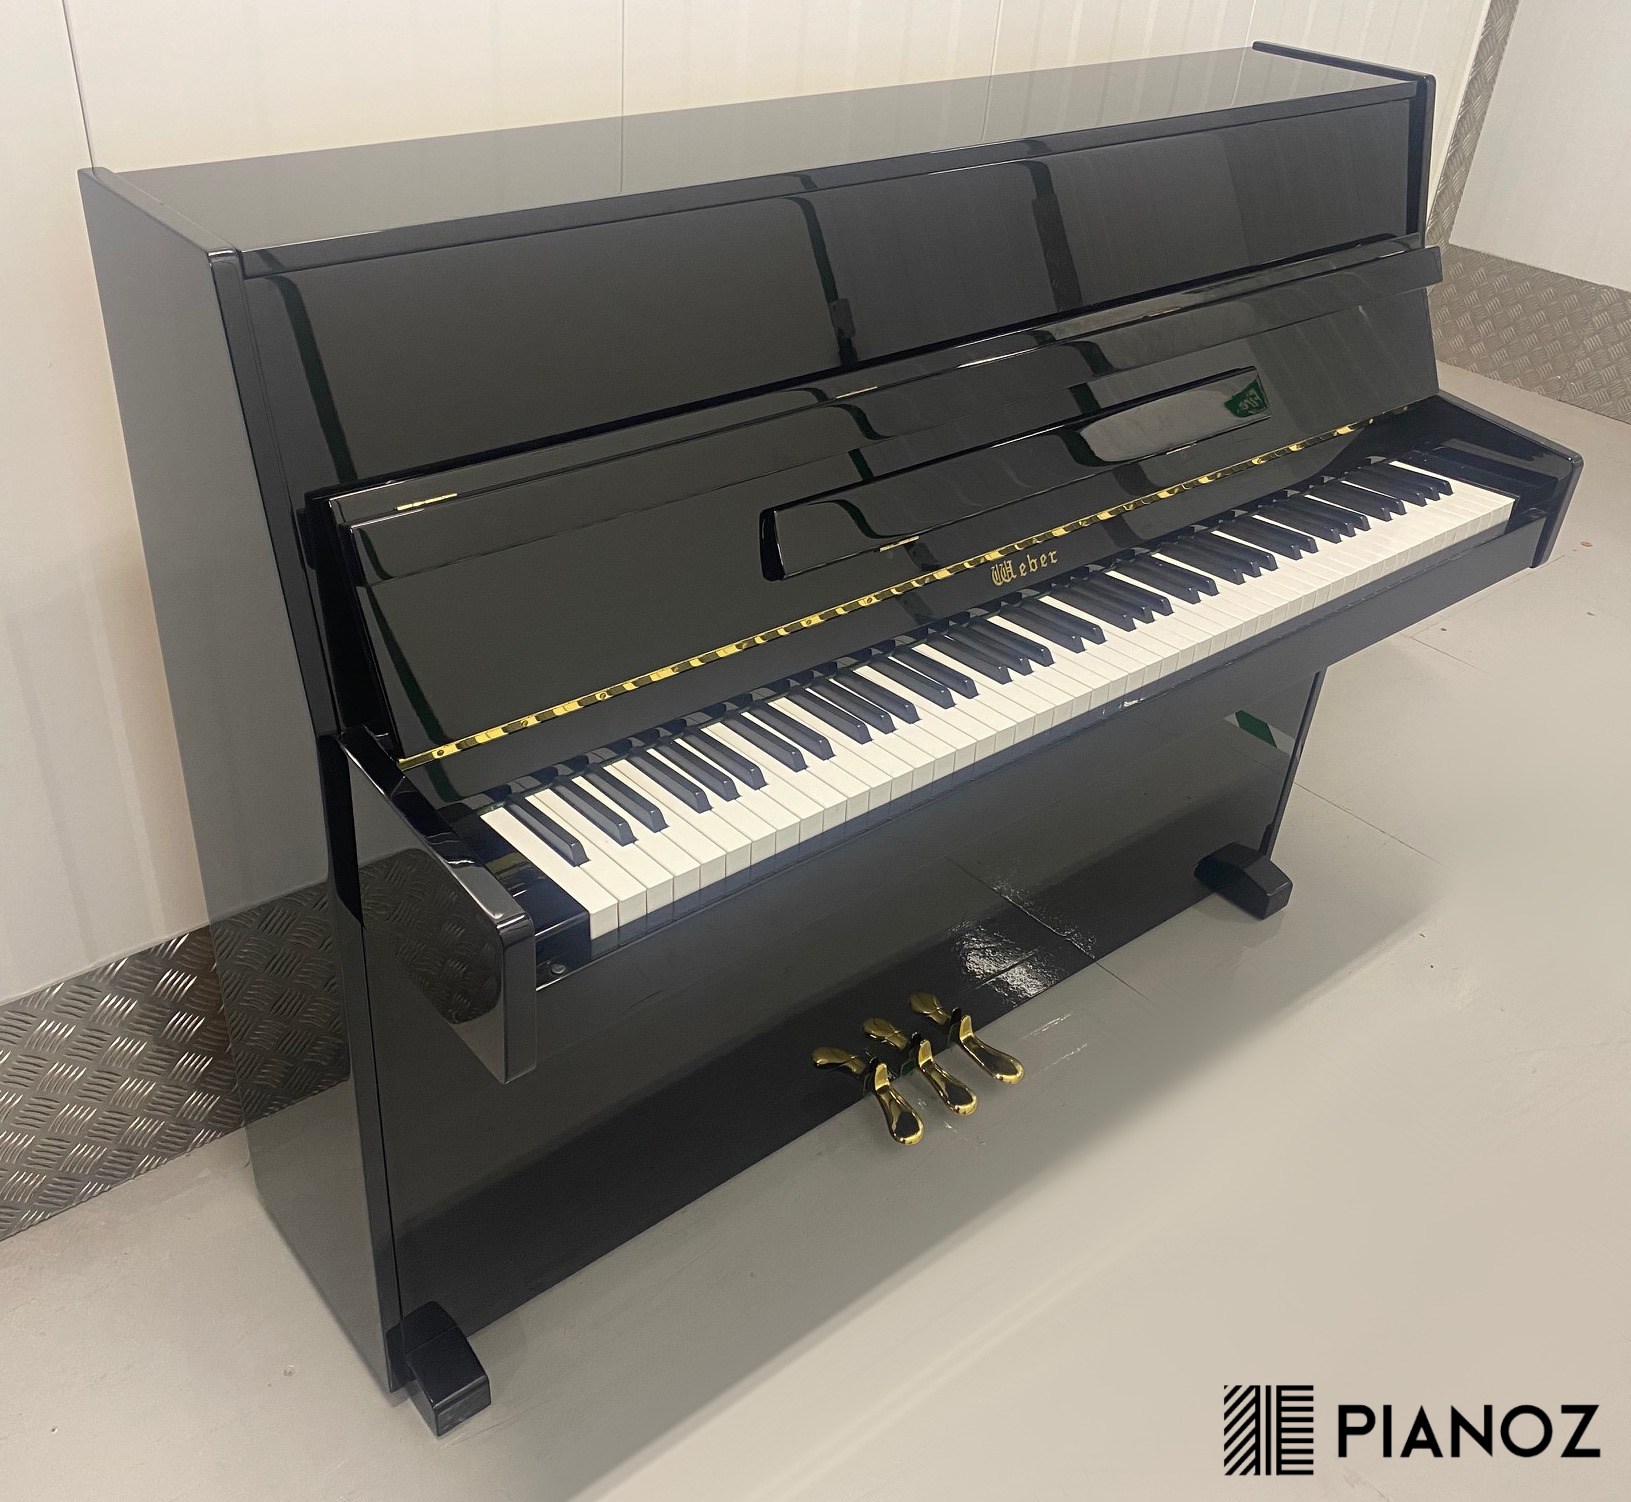 Weber wle410 Black Upright Piano piano for sale in UK